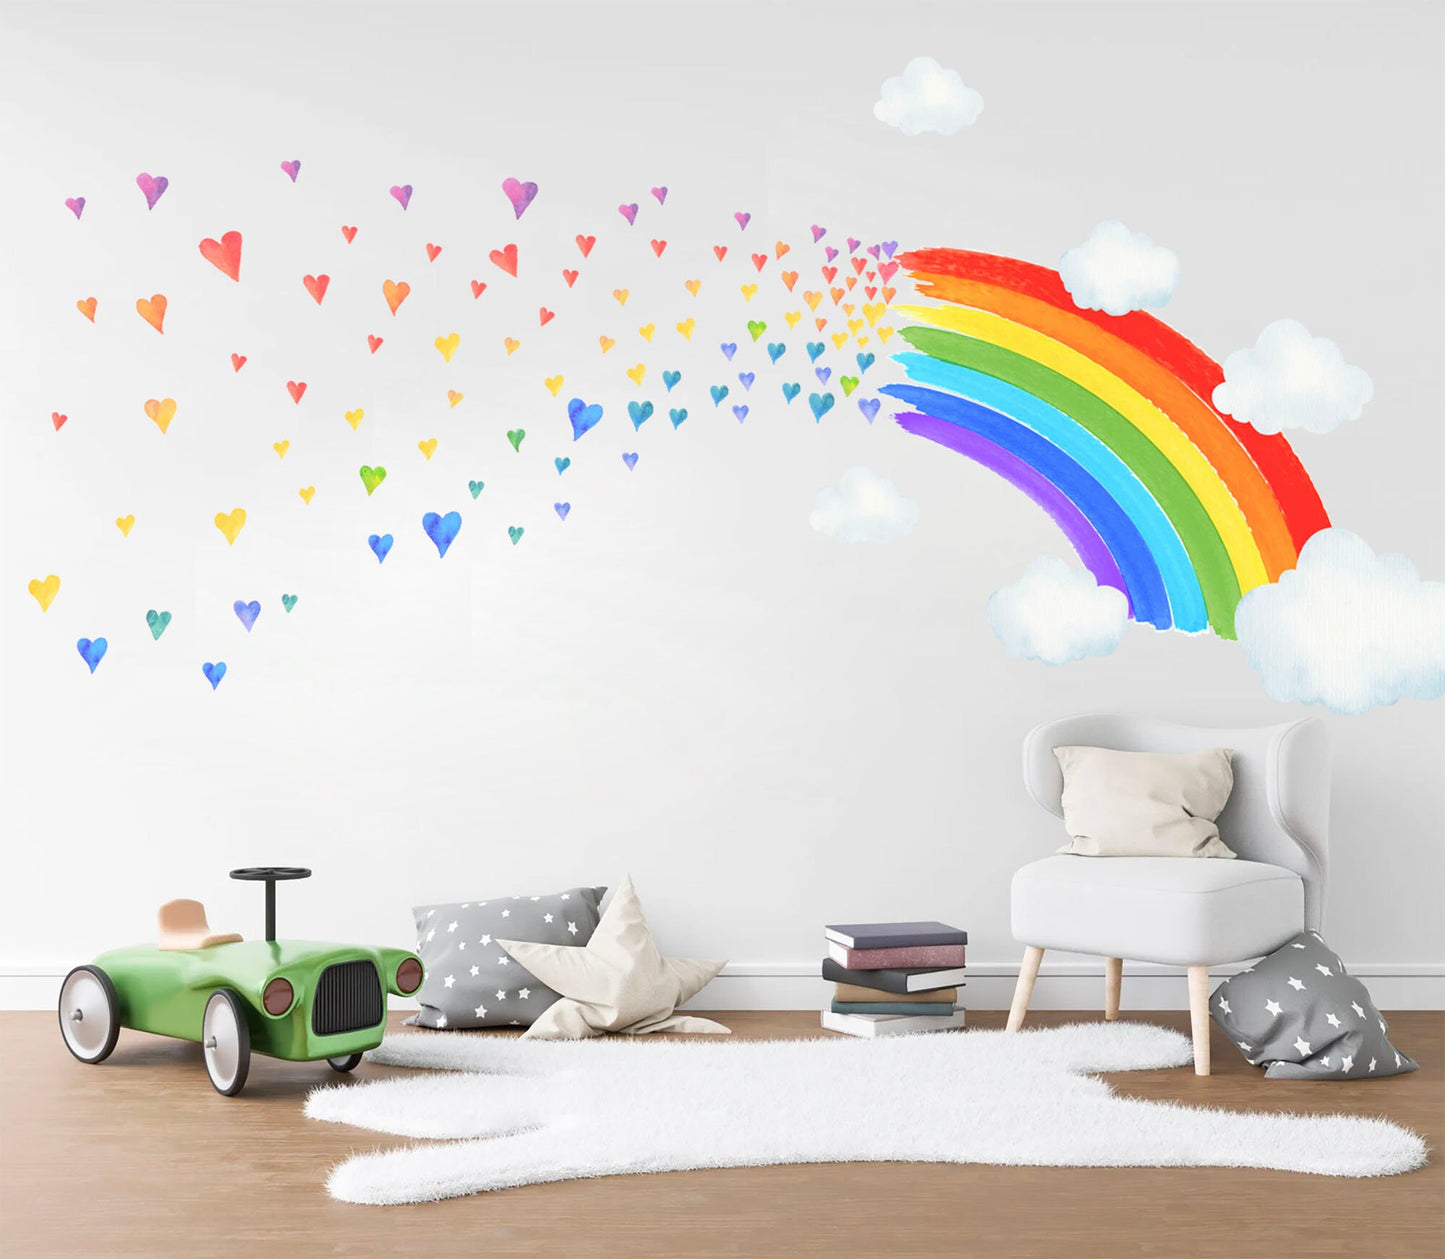 Rainbow Hearts Cloud Wall Sticker - Colorful Watercolor Decal for Kids Room Decor - BR222